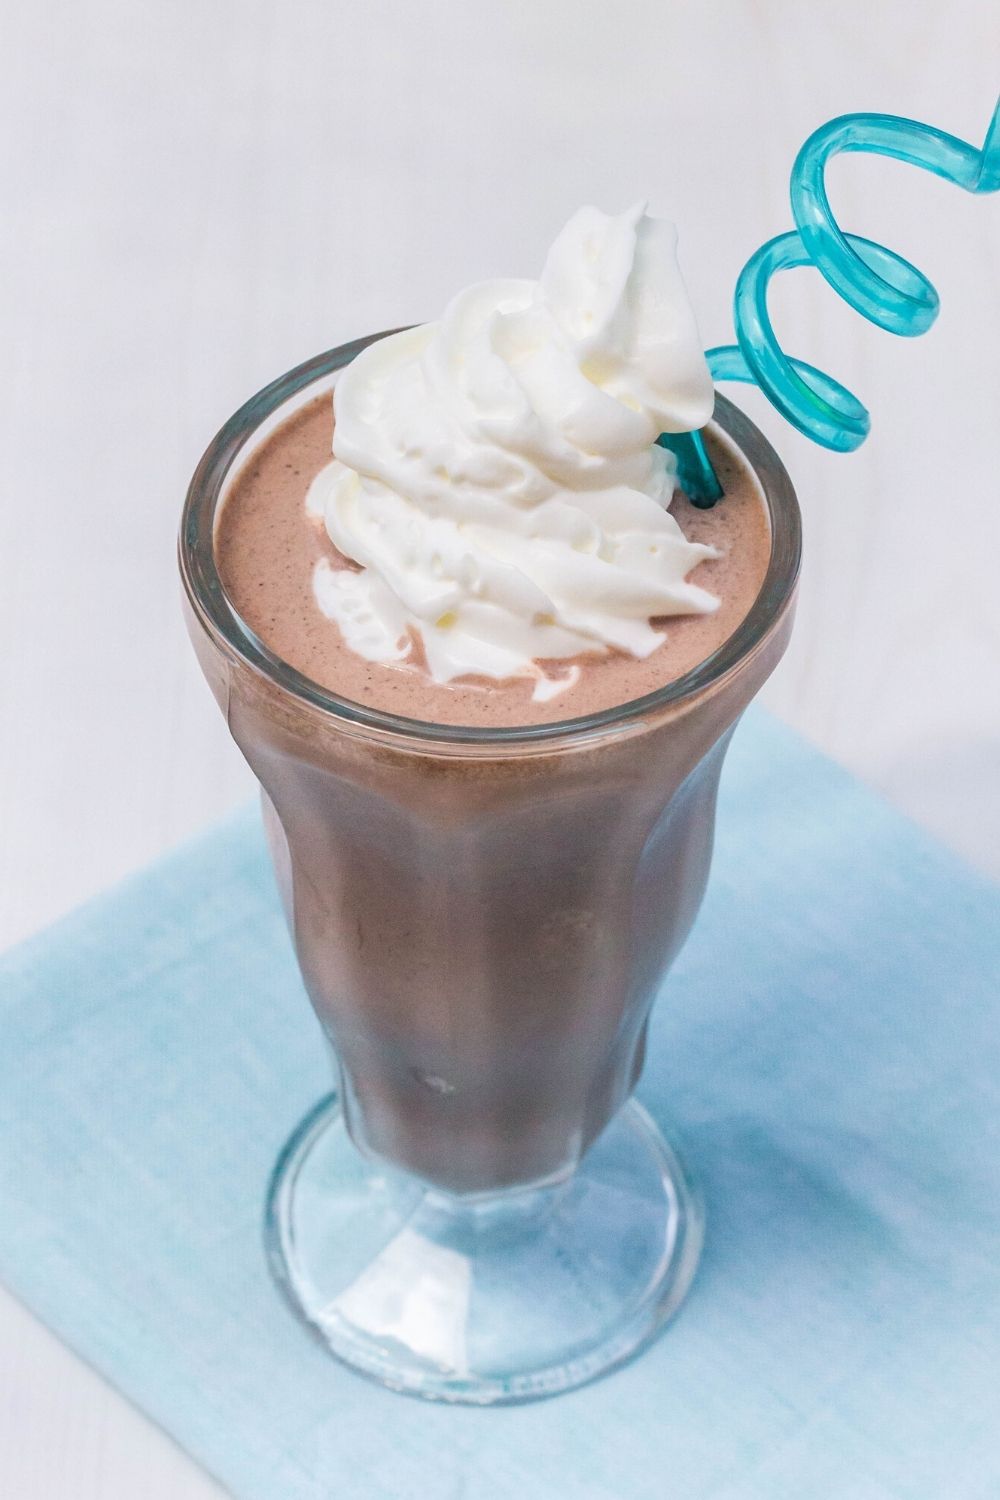 an ice cream milkshake glass is filled with a Ninja Creami milkshake and topped with whipped cream. A blue plastic swirly straw is in the glass.